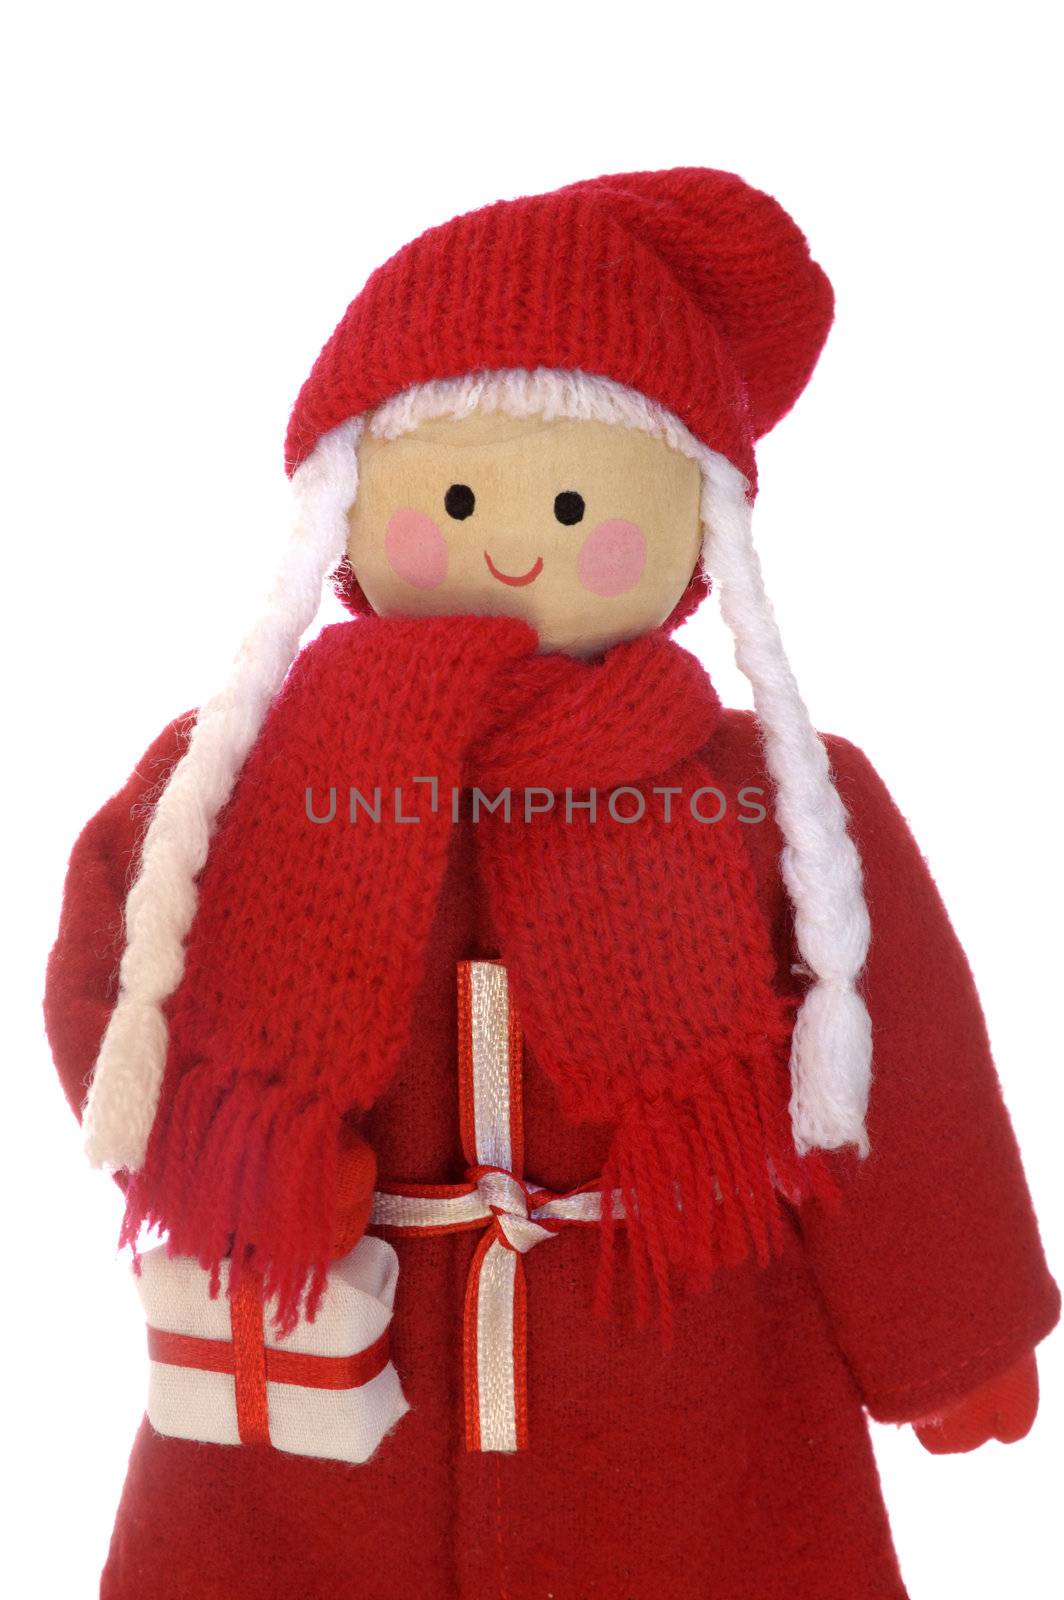 Mother Christmas doll by Bateleur